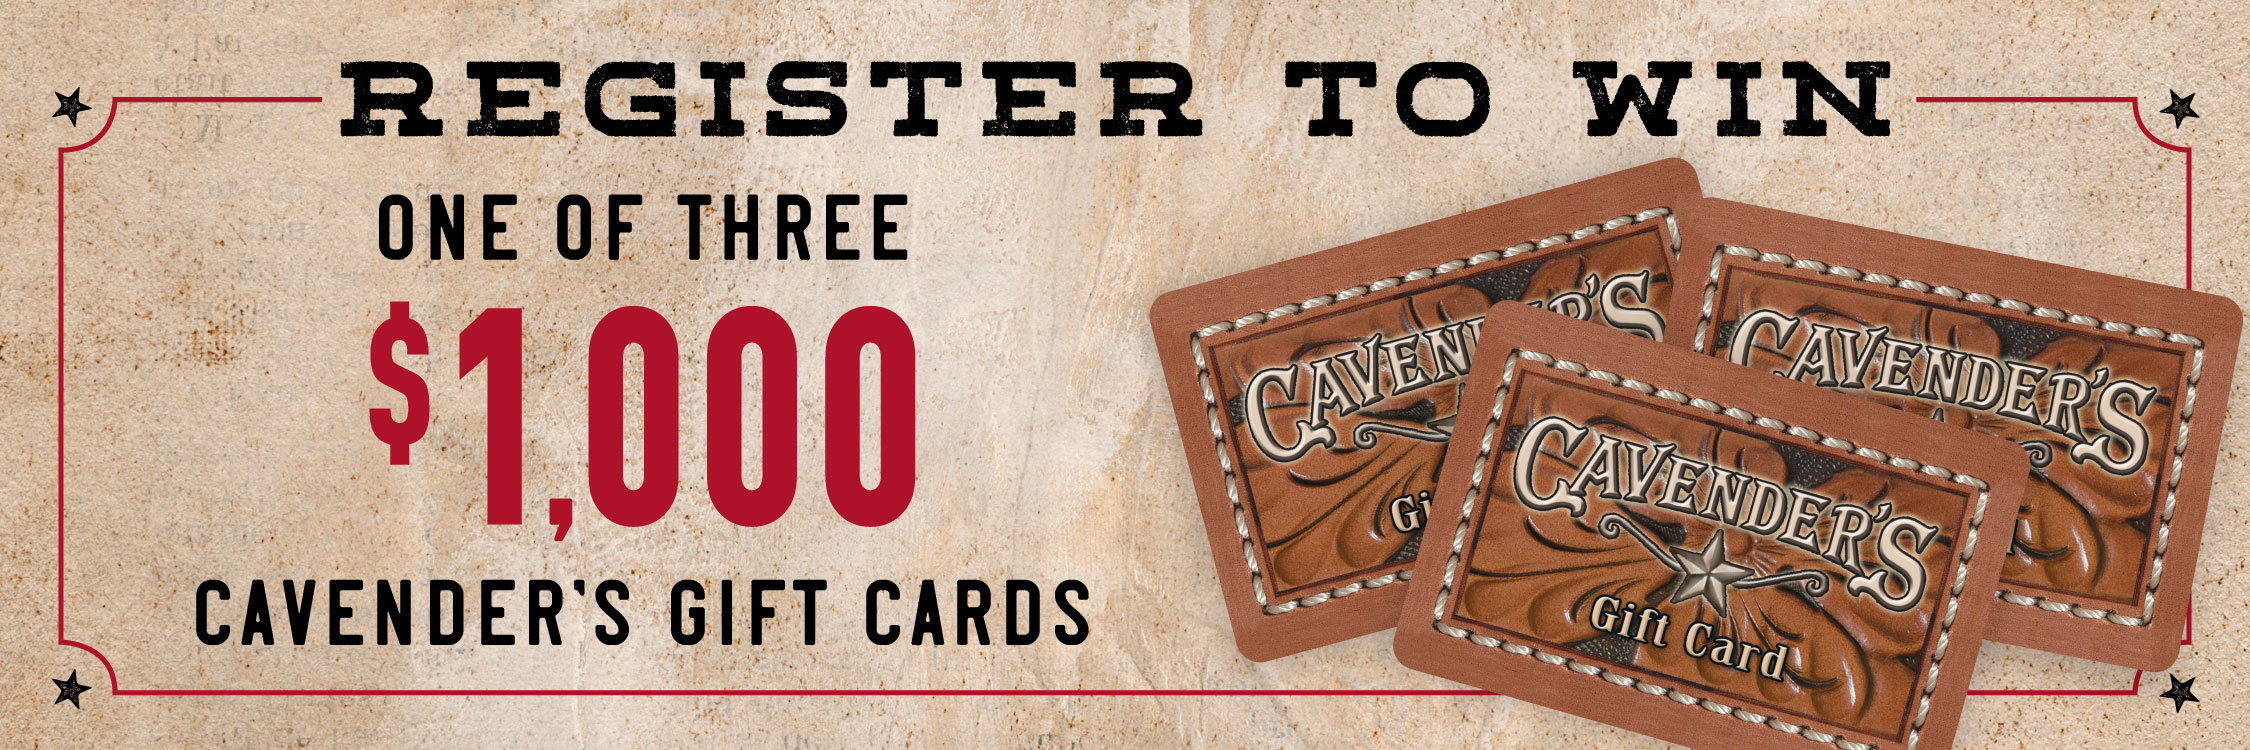 Register to Win One of Three $1,000 Cavender's Gift Cards